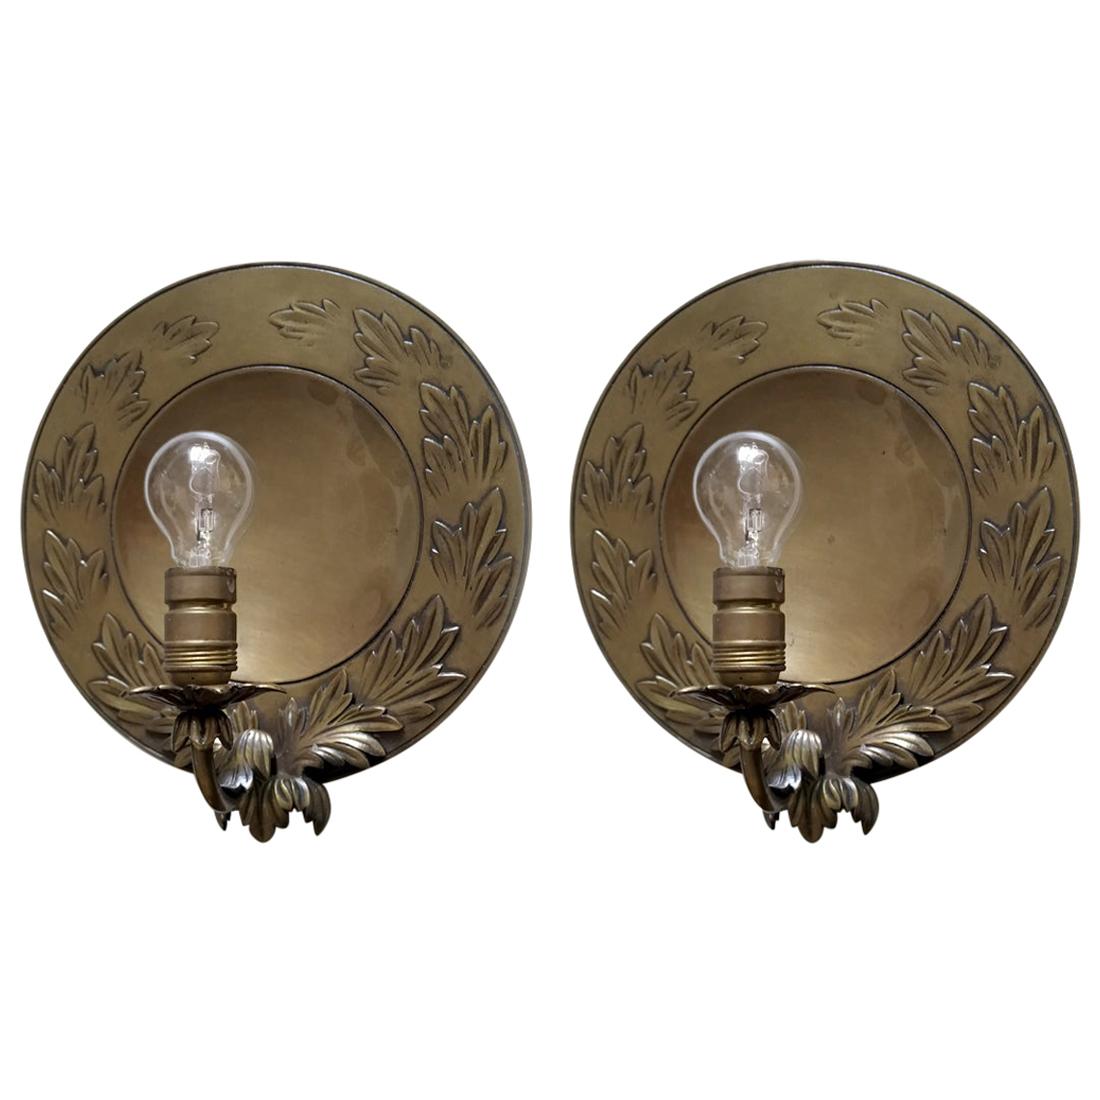 Pair of French Empire Vintage Wall Applique Lights Objects Sconces, 1920s